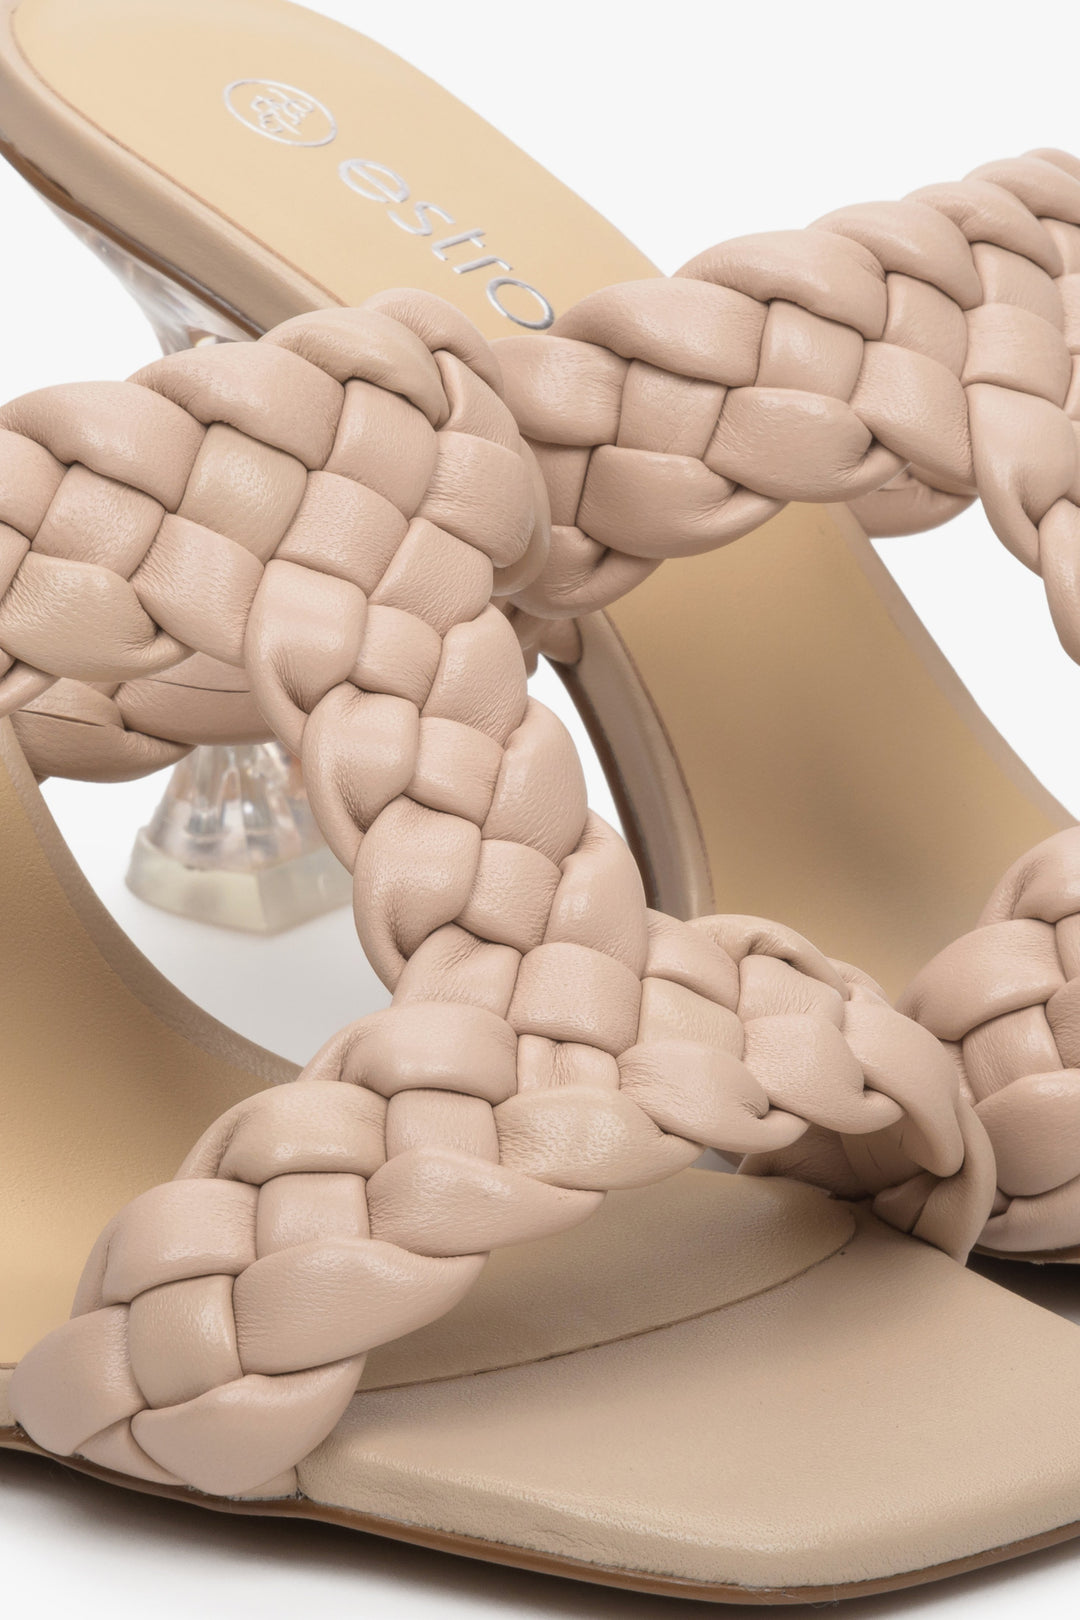 Women's beige leather heeled sandals - a close-up on details.